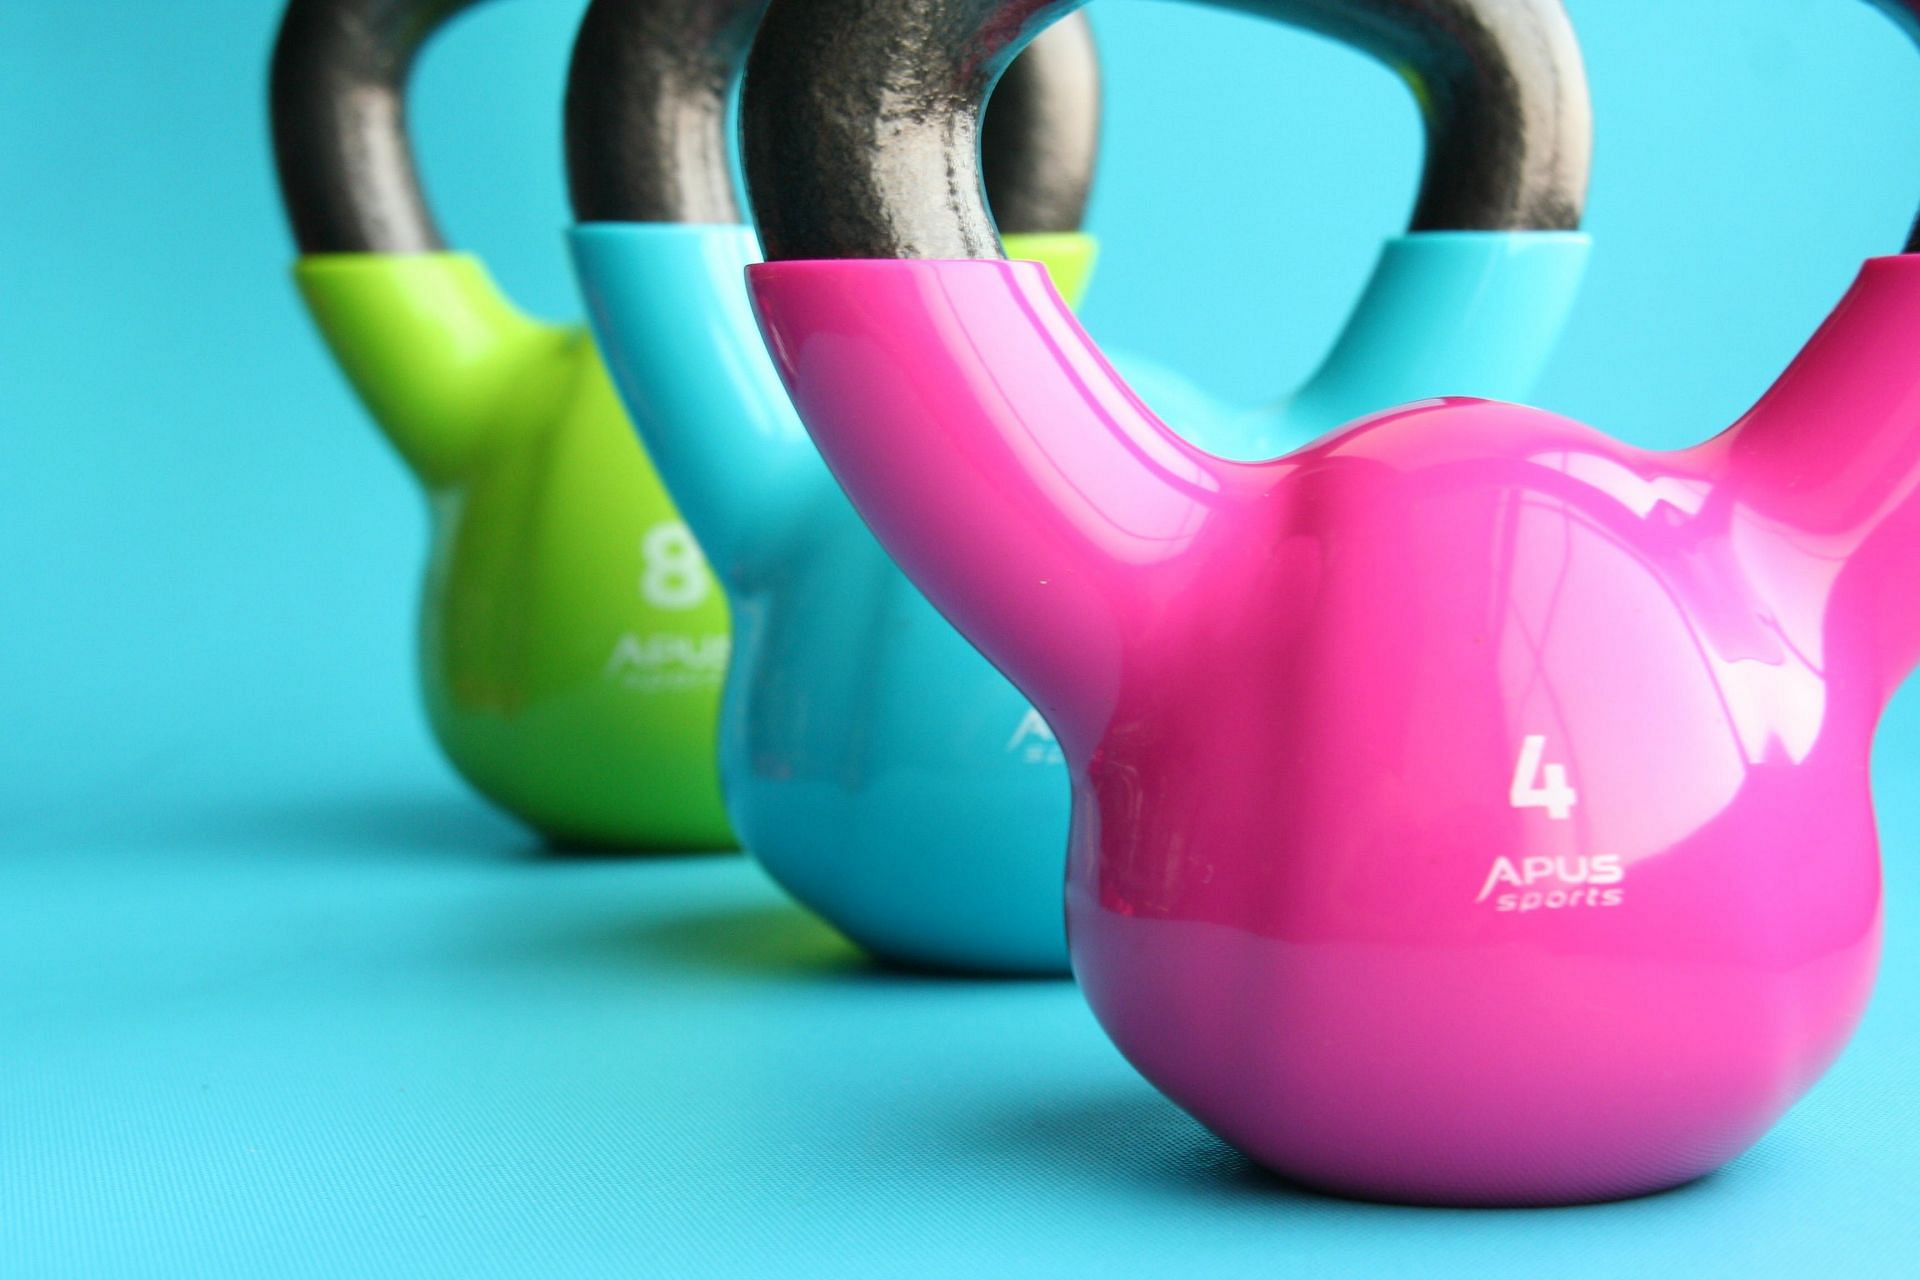 Importance of kettlebell (image sourced via Pexels / Photo by pixabay)